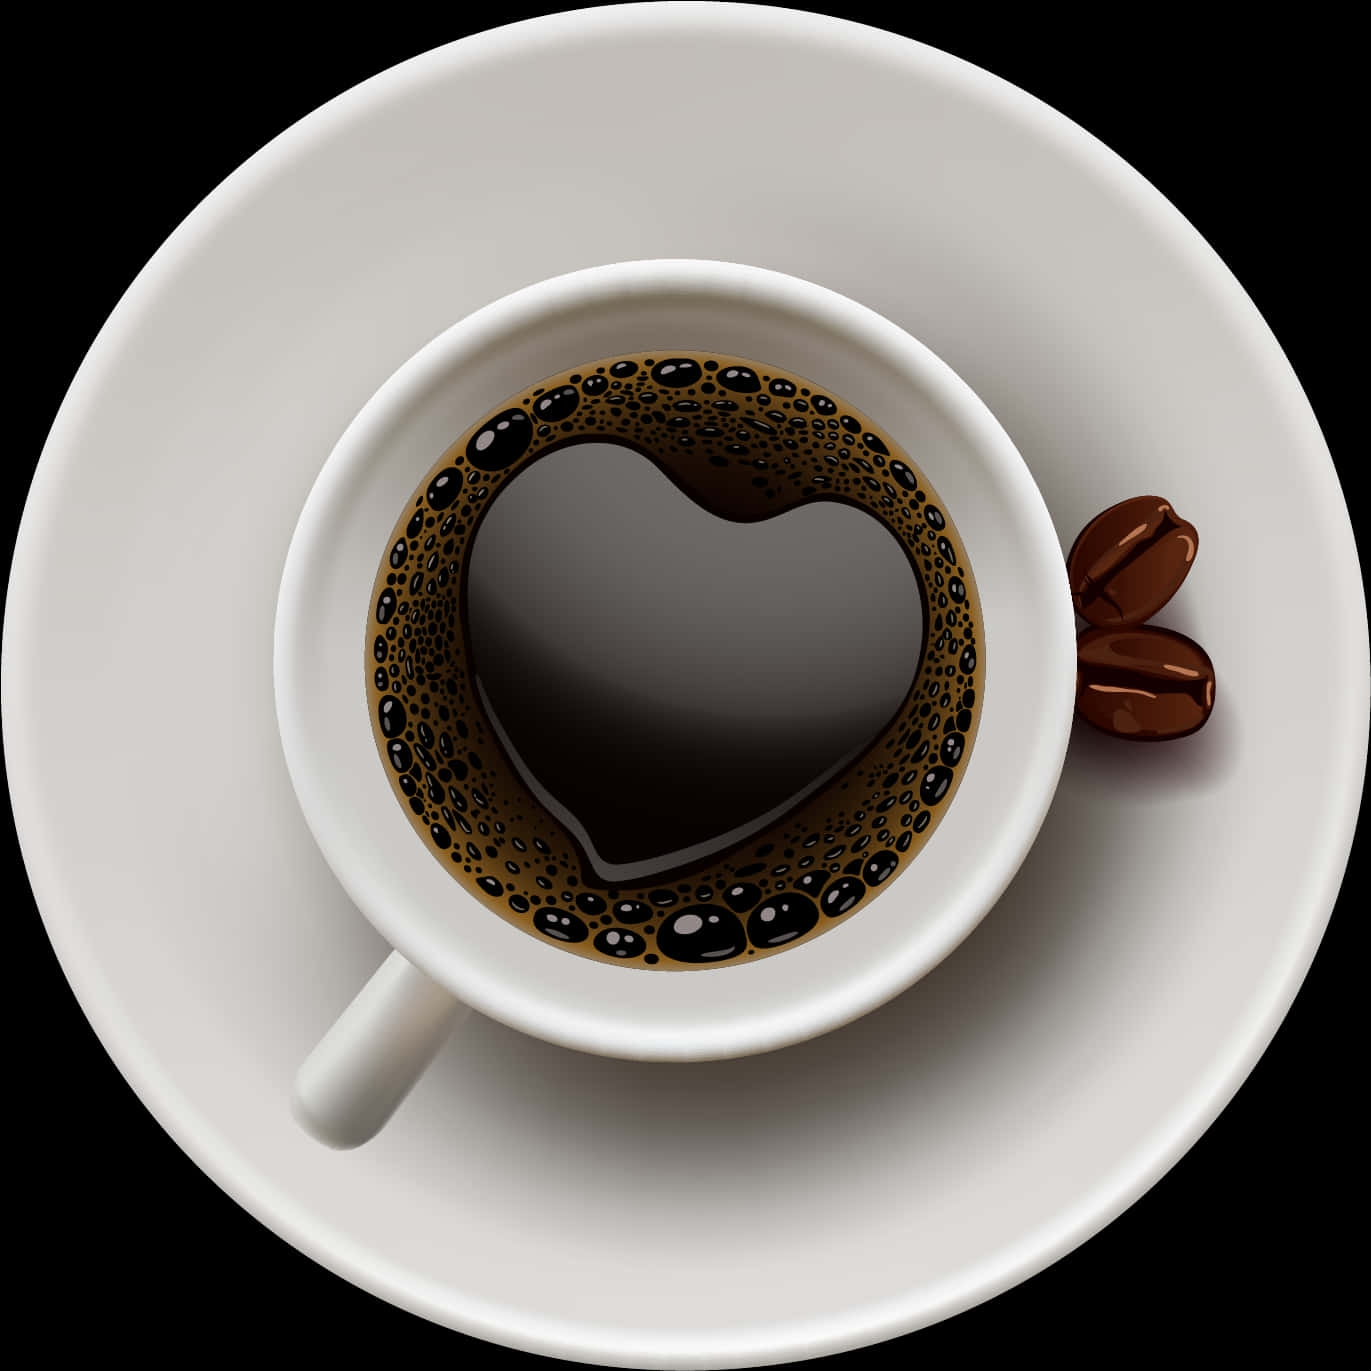 A Cup Of Coffee With A Heart Shaped Liquid In It